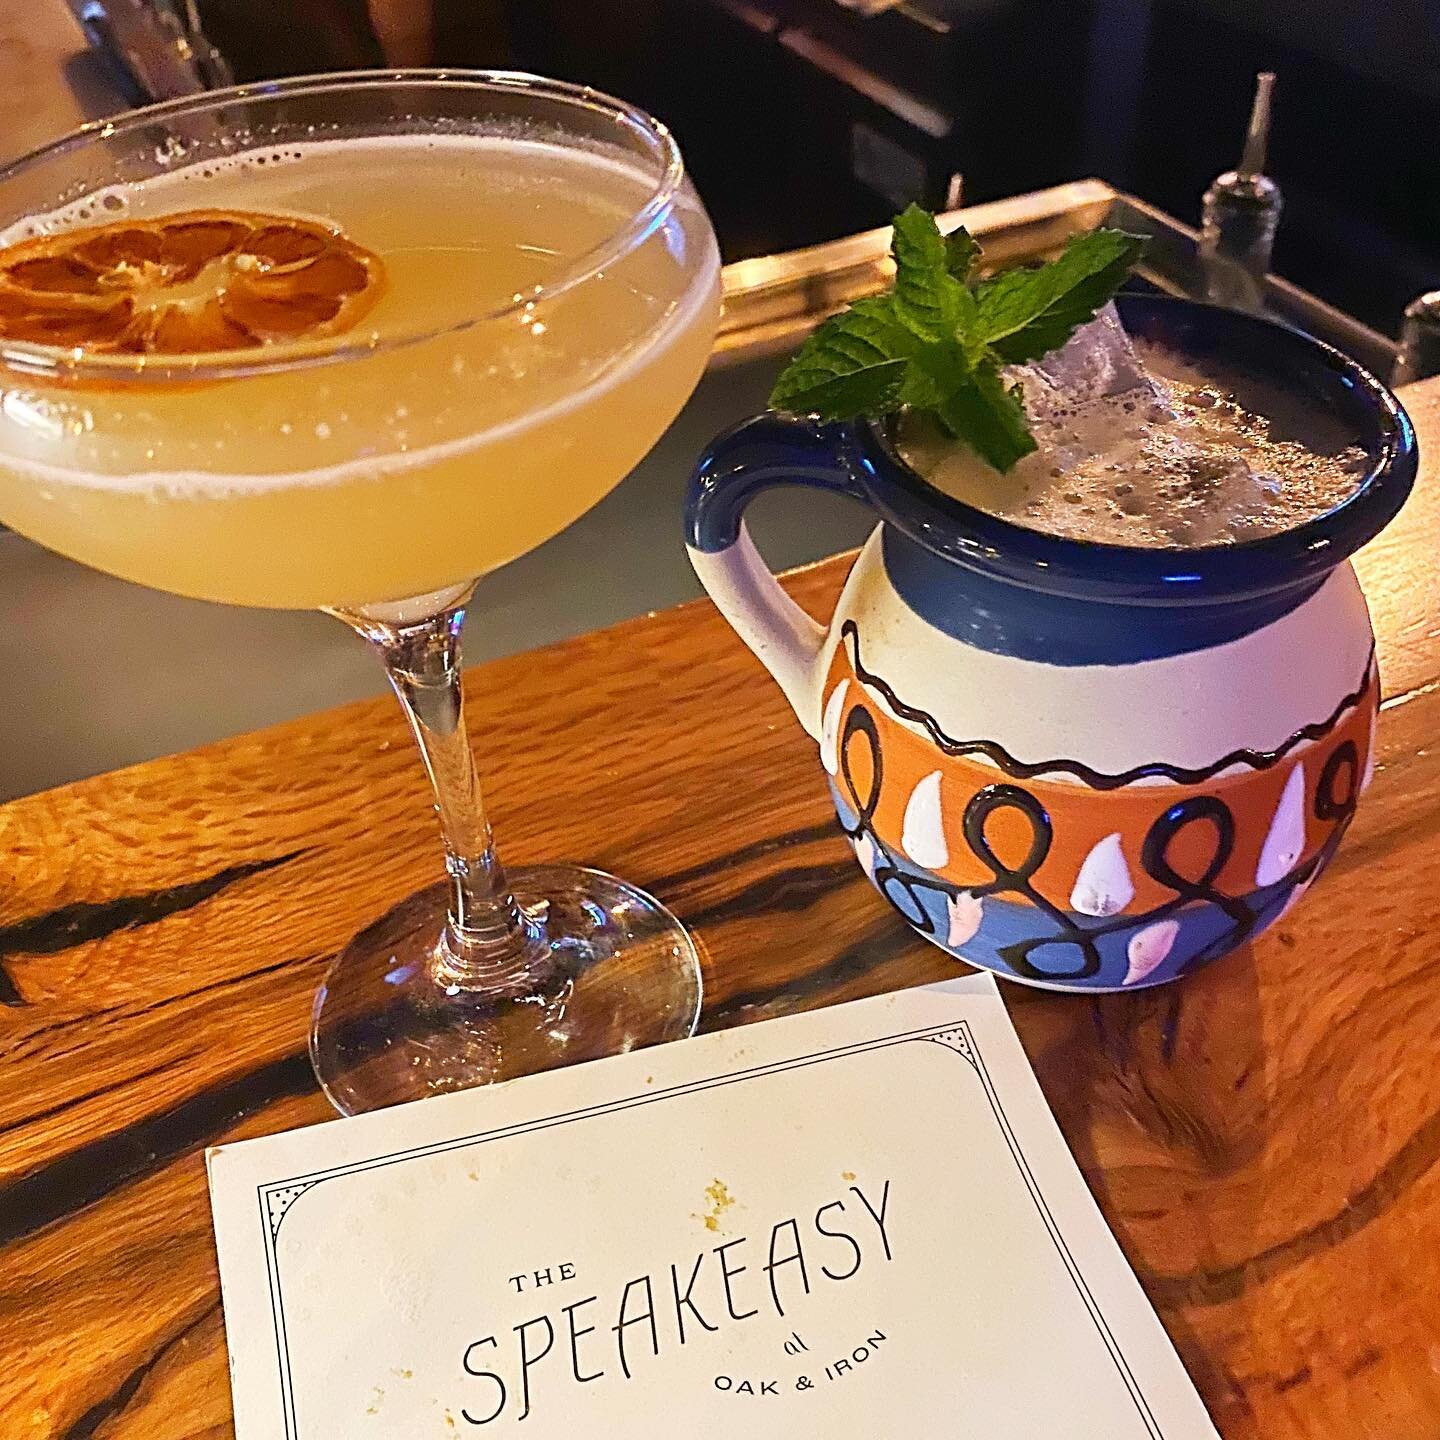 It&rsquo;s FRIDAY! Who&rsquo;s ready for a cocktail at @oakandironto - servings up delicious spirits with brilliant ingredients. Smooth and refreshing. Go check it out! #conejovalleyspotlight #conejovalleybusiness #conejovalleydrinks #thousandoaks #w